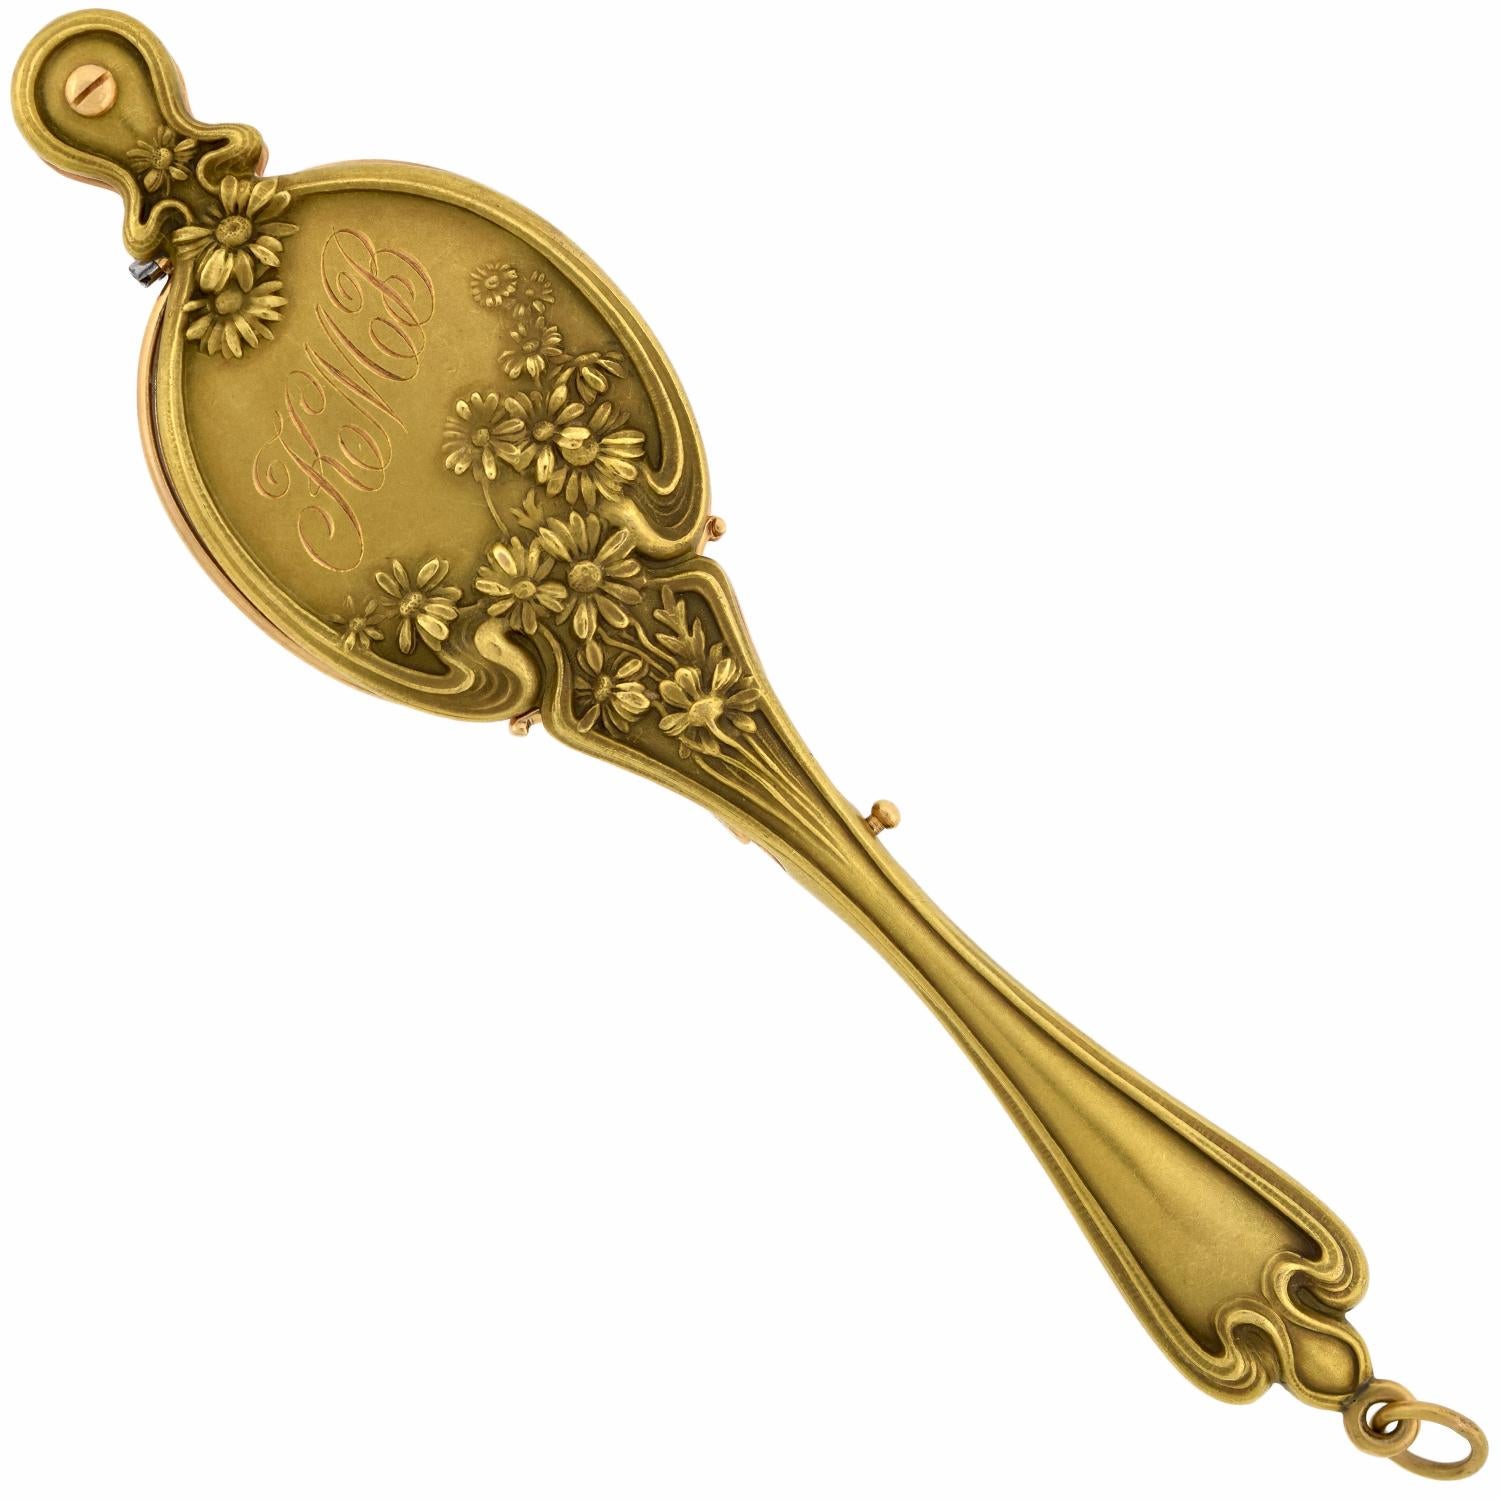 An absolutely fabulous signed Krementz & Co. lorgnette from the Art Nouveau (ca1900s) period! Crafted in solid 14kt yellow gold, this incredible piece is comprised of a pair of folding glasses held within a breathtaking repousse lorgnette